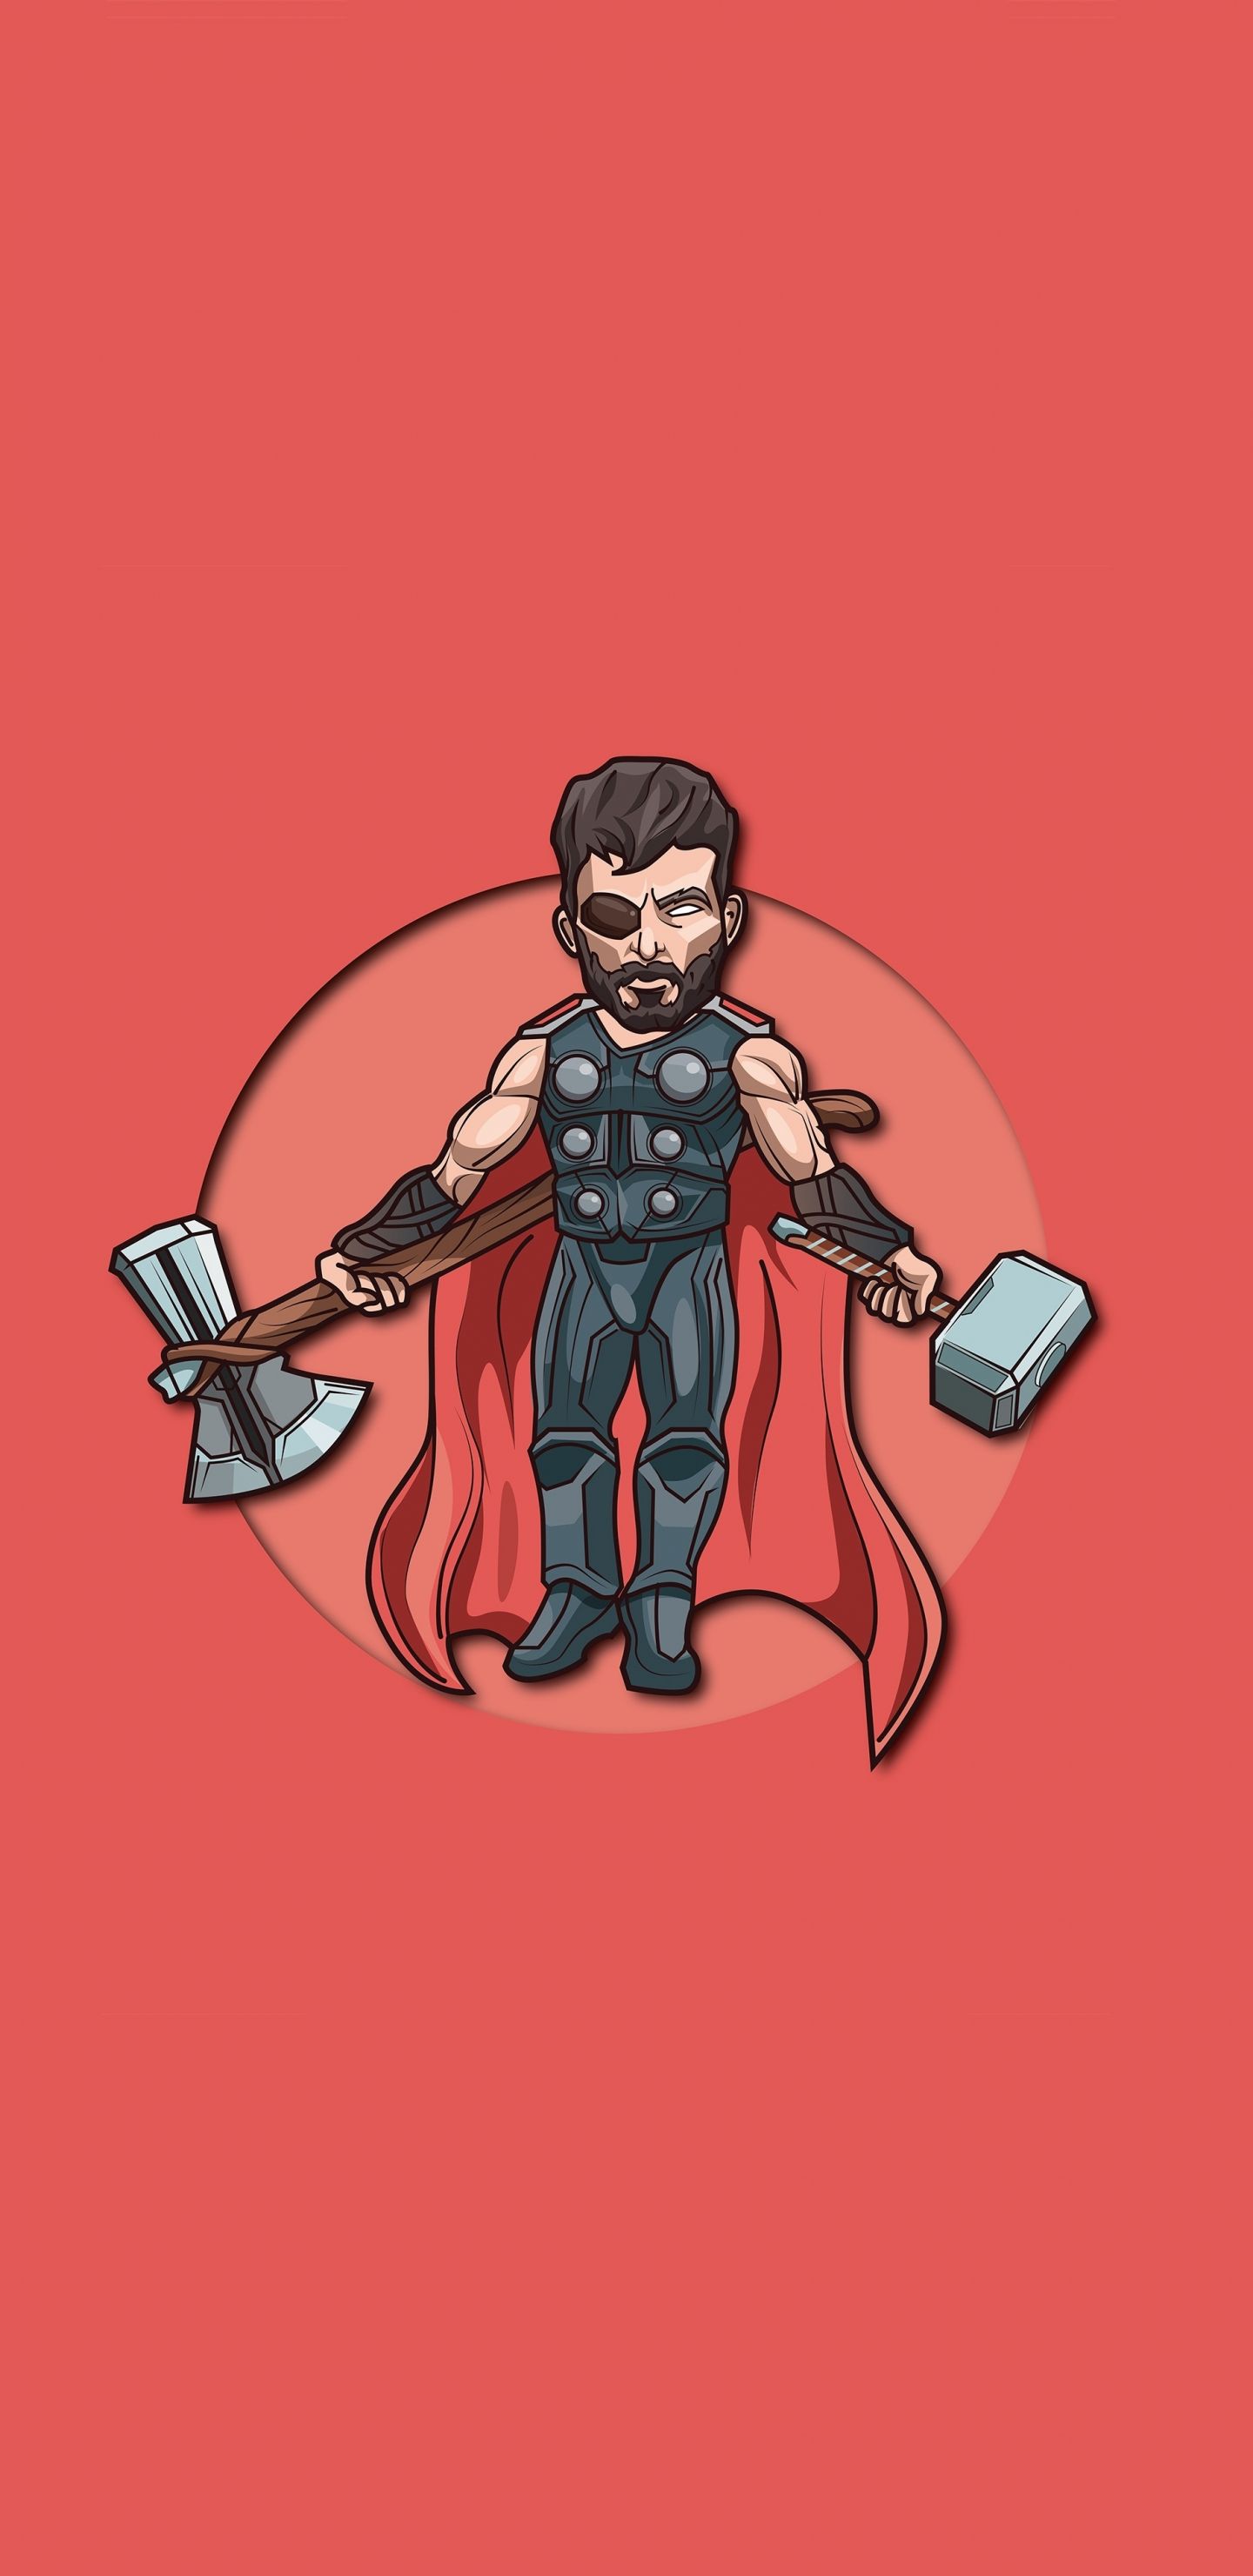 Download wallpaper 1440x2960 minimal, thor with 2 hammers, samsung galaxy s samsung galaxy s8 plus, 1440x2960 HD background, 24624